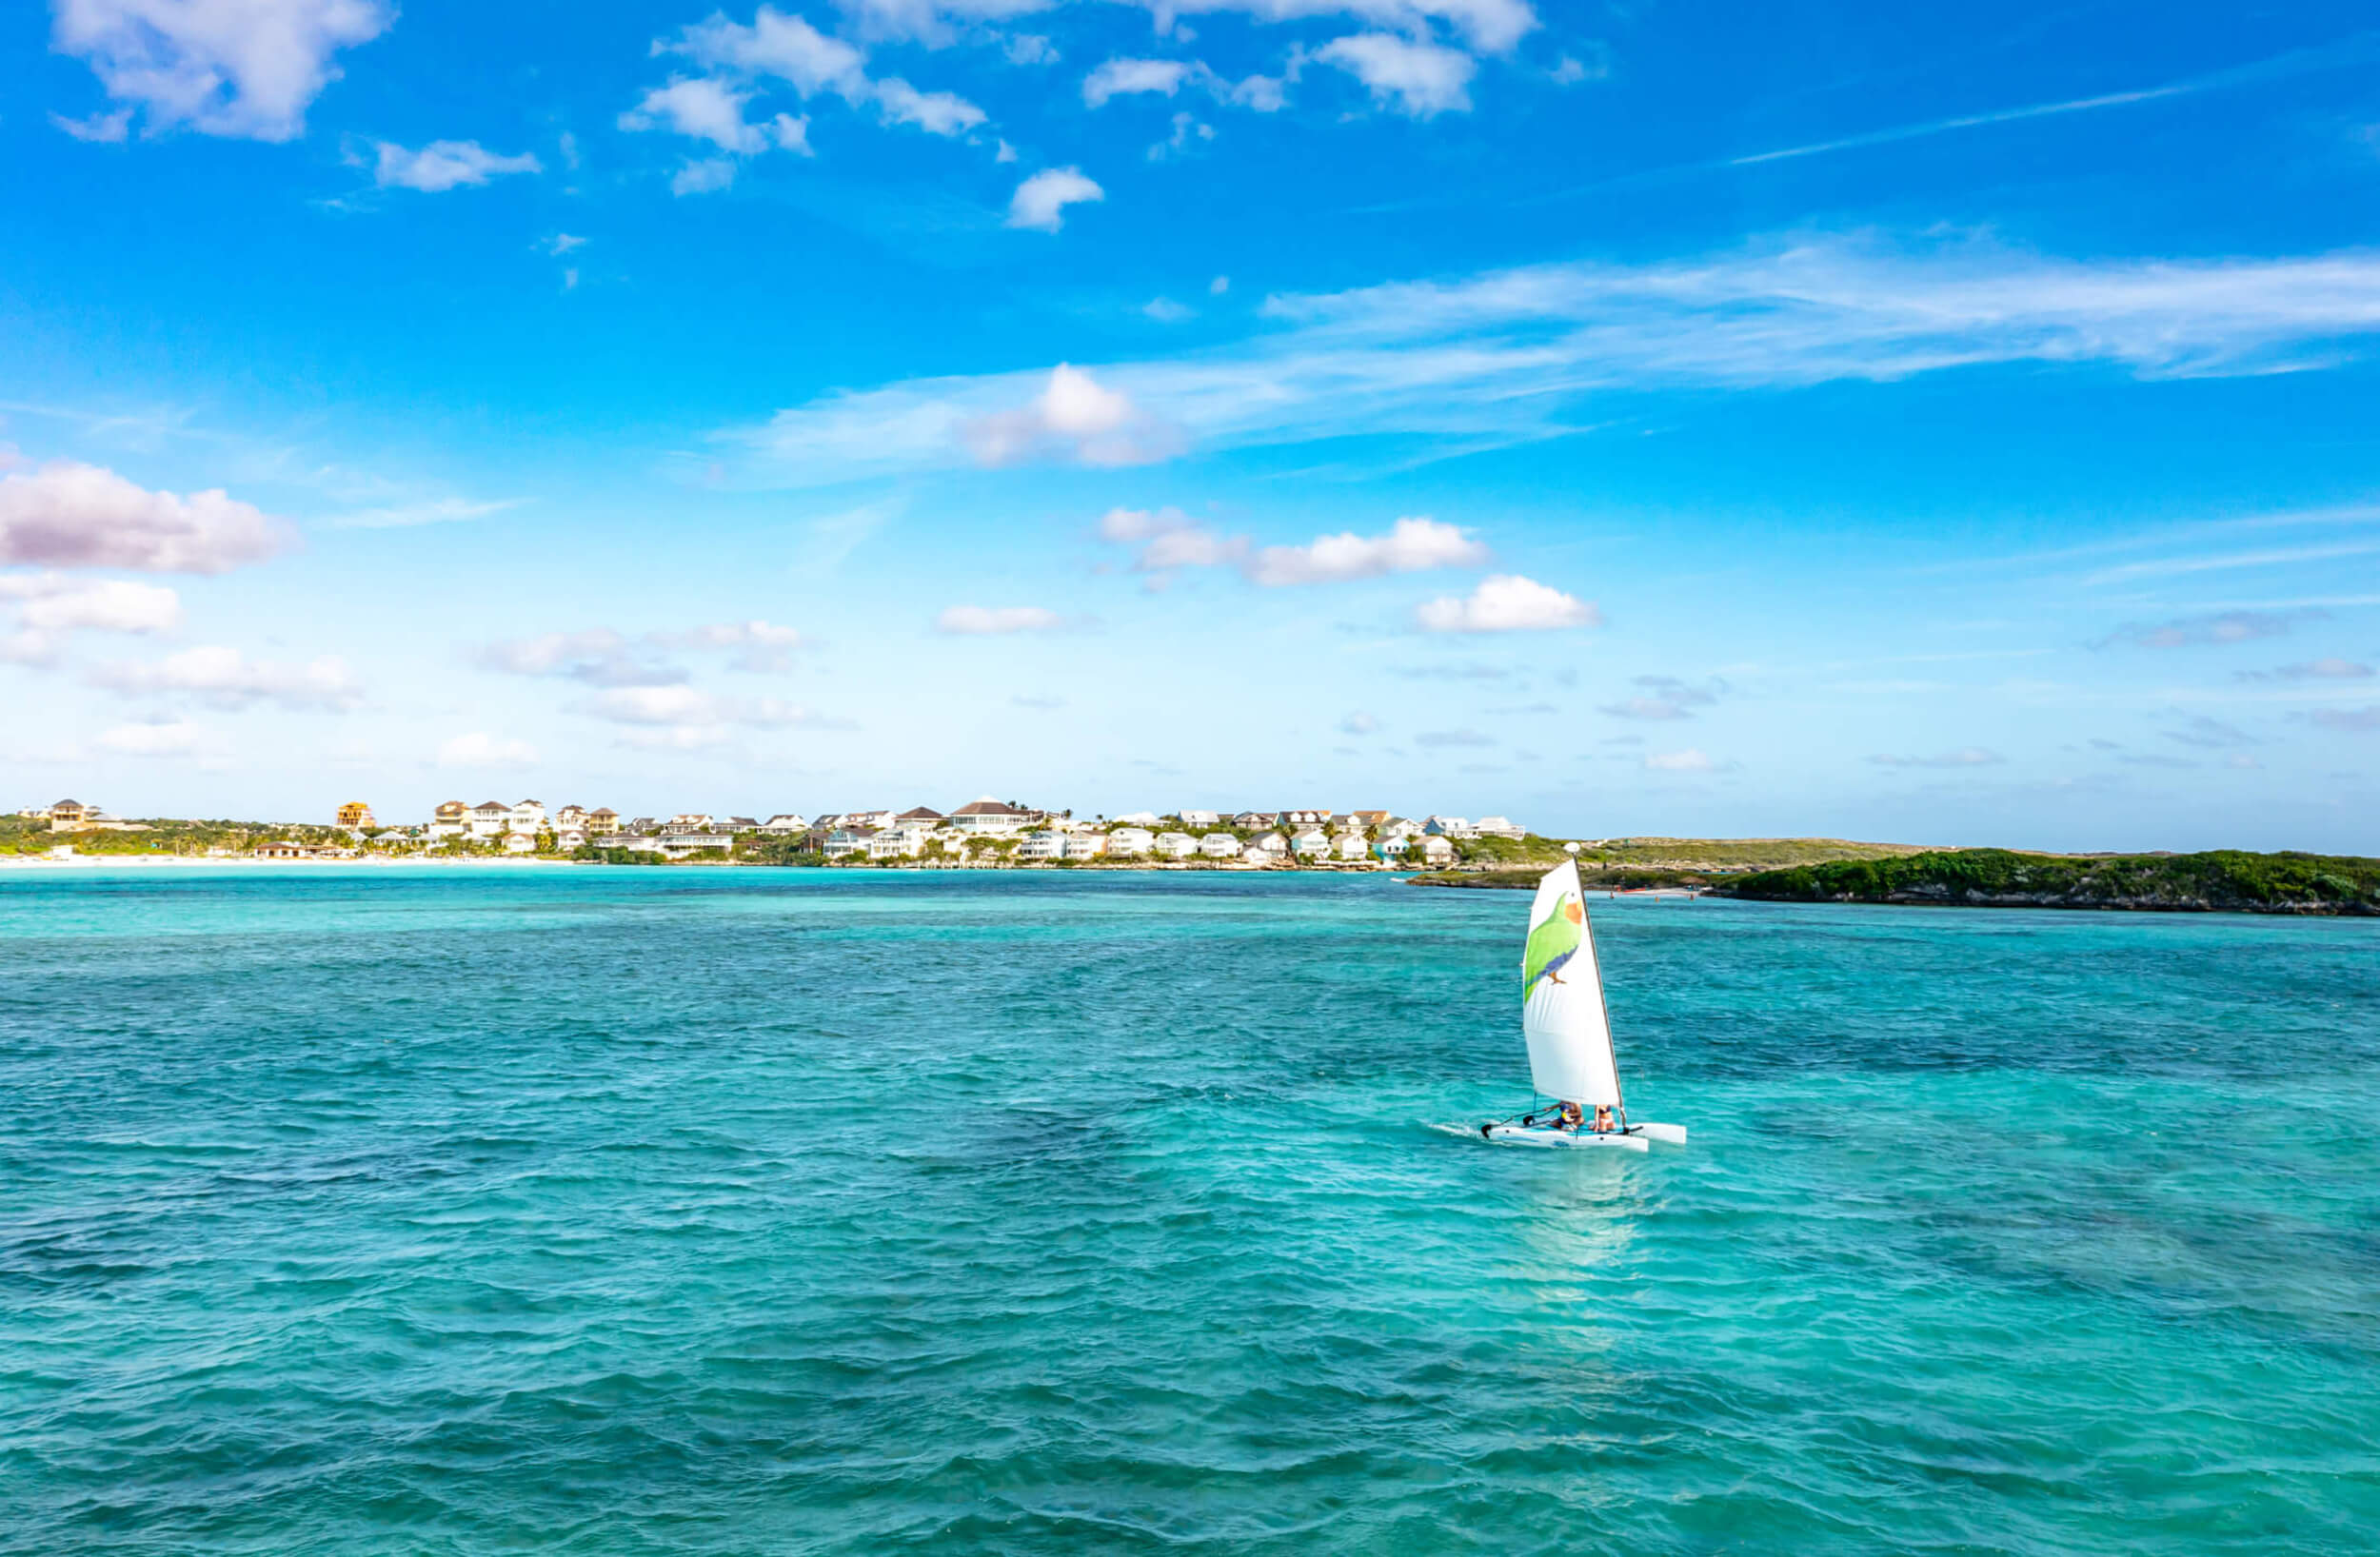 Image of a boat with The Abaco Club sign